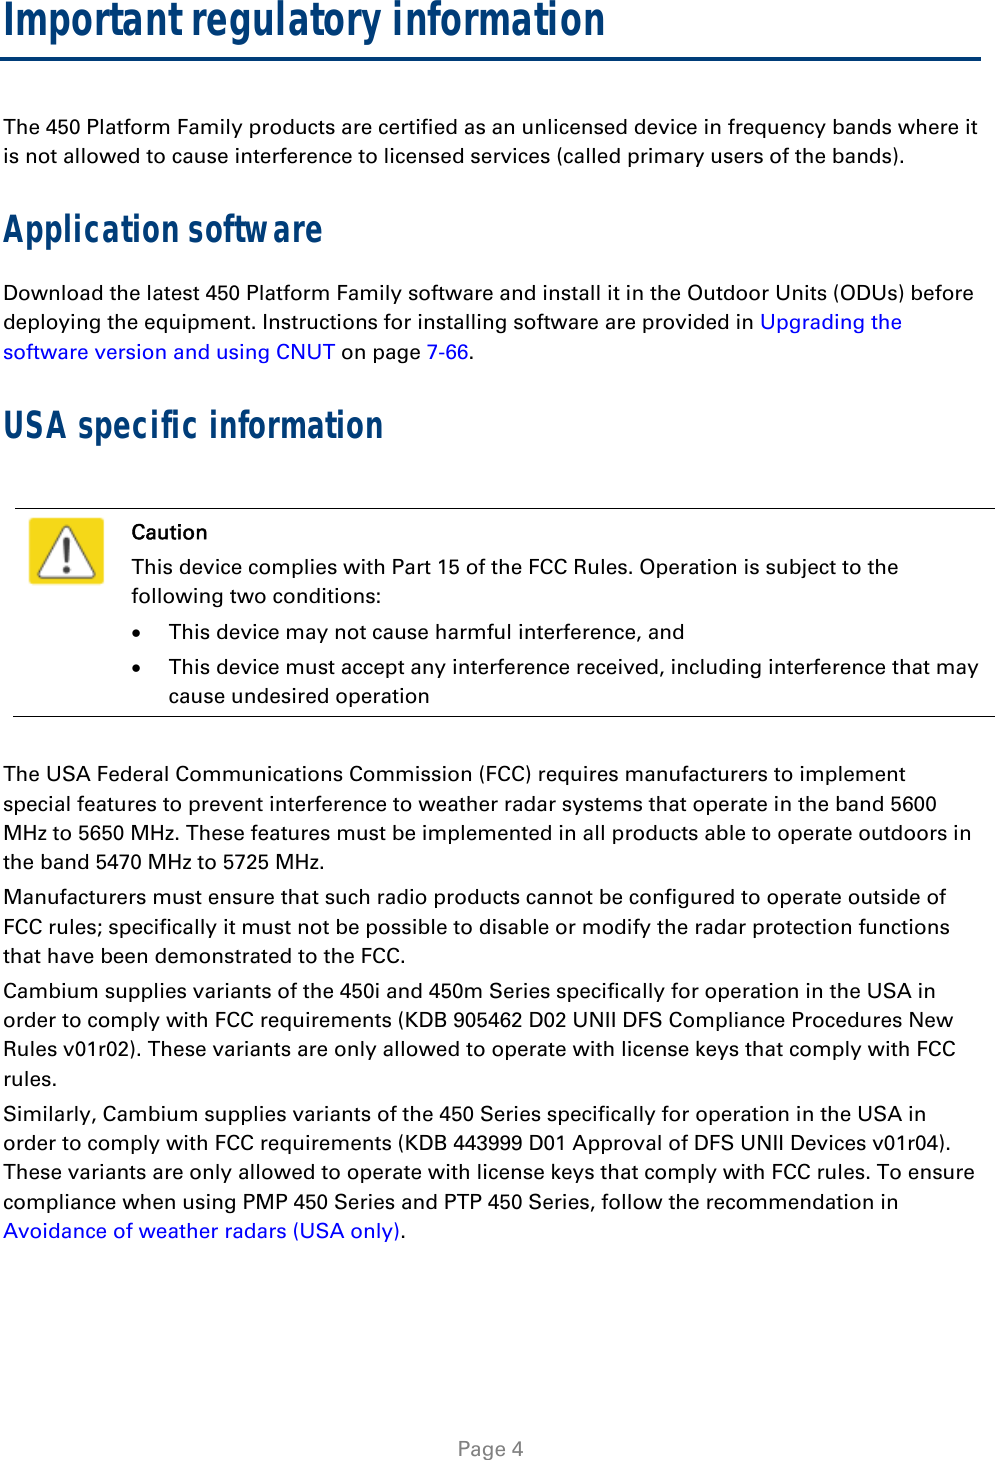   Page 4 Important regulatory information The 450 Platform Family products are certified as an unlicensed device in frequency bands where it is not allowed to cause interference to licensed services (called primary users of the bands). Application software Download the latest 450 Platform Family software and install it in the Outdoor Units (ODUs) before deploying the equipment. Instructions for installing software are provided in Upgrading the software version and using CNUT on page 7-66. USA specific information   Caution This device complies with Part 15 of the FCC Rules. Operation is subject to the following two conditions:  This device may not cause harmful interference, and  This device must accept any interference received, including interference that may cause undesired operation  The USA Federal Communications Commission (FCC) requires manufacturers to implement special features to prevent interference to weather radar systems that operate in the band 5600 MHz to 5650 MHz. These features must be implemented in all products able to operate outdoors in the band 5470 MHz to 5725 MHz. Manufacturers must ensure that such radio products cannot be configured to operate outside of FCC rules; specifically it must not be possible to disable or modify the radar protection functions that have been demonstrated to the FCC. Cambium supplies variants of the 450i and 450m Series specifically for operation in the USA in order to comply with FCC requirements (KDB 905462 D02 UNII DFS Compliance Procedures New Rules v01r02). These variants are only allowed to operate with license keys that comply with FCC rules.  Similarly, Cambium supplies variants of the 450 Series specifically for operation in the USA in order to comply with FCC requirements (KDB 443999 D01 Approval of DFS UNII Devices v01r04). These variants are only allowed to operate with license keys that comply with FCC rules. To ensure compliance when using PMP 450 Series and PTP 450 Series, follow the recommendation in Avoidance of weather radars (USA only).  